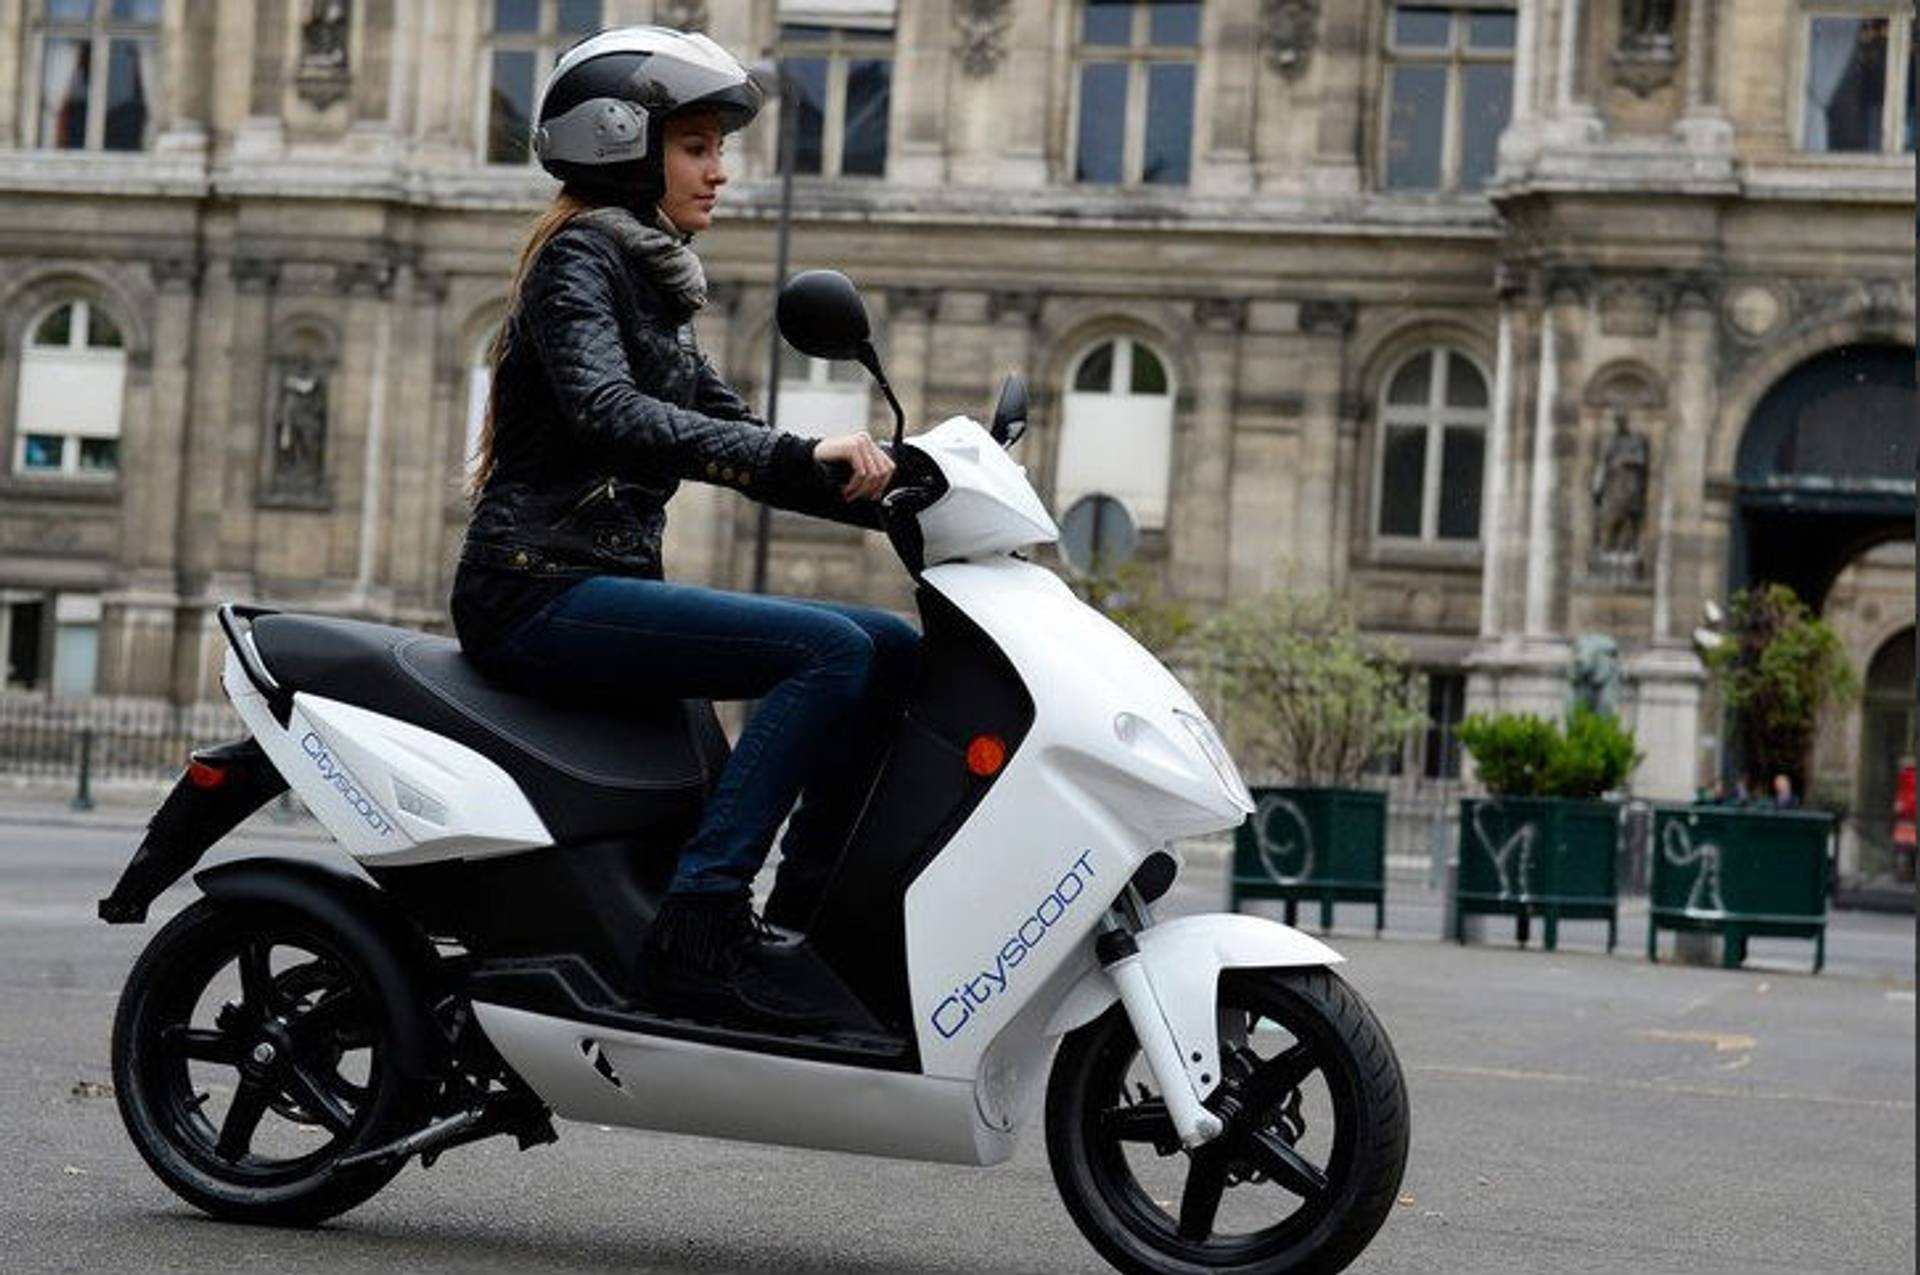 Paris allows you to rent electric scooters